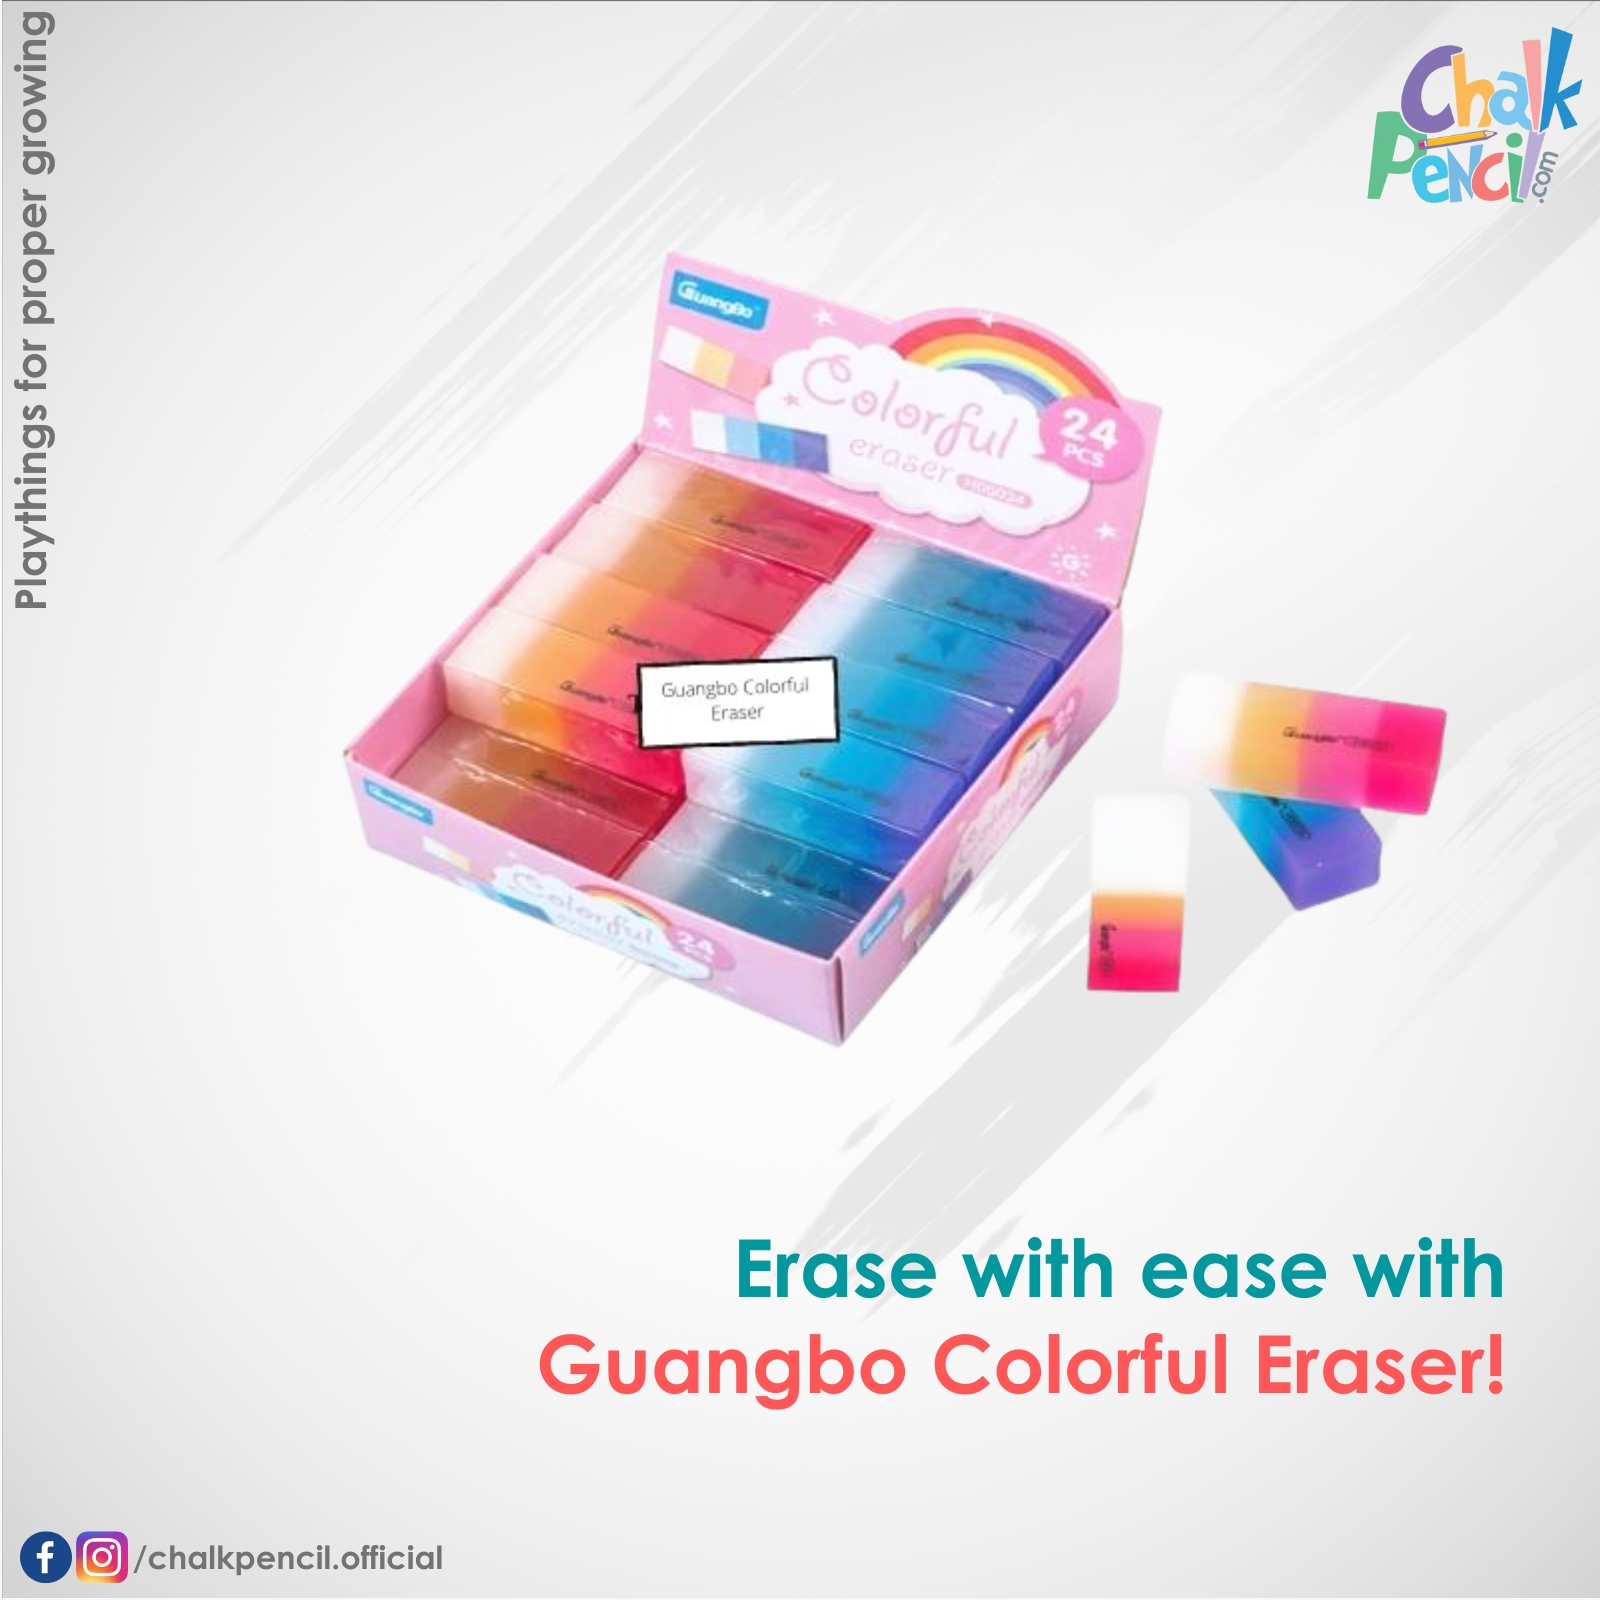 Guangbo Colorful Eraser